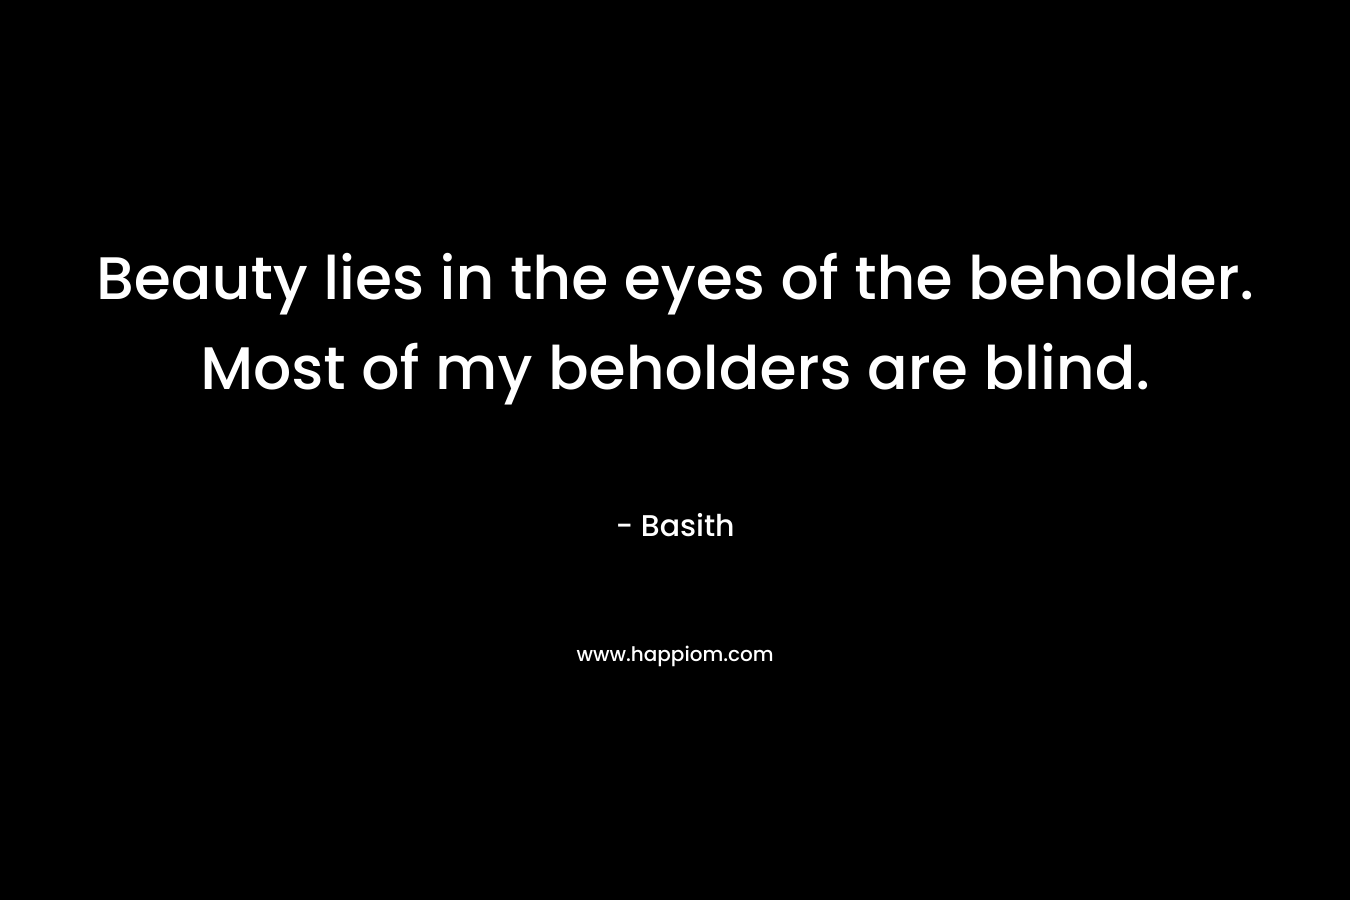 Beauty lies in the eyes of the beholder. Most of my beholders are blind. – Basith